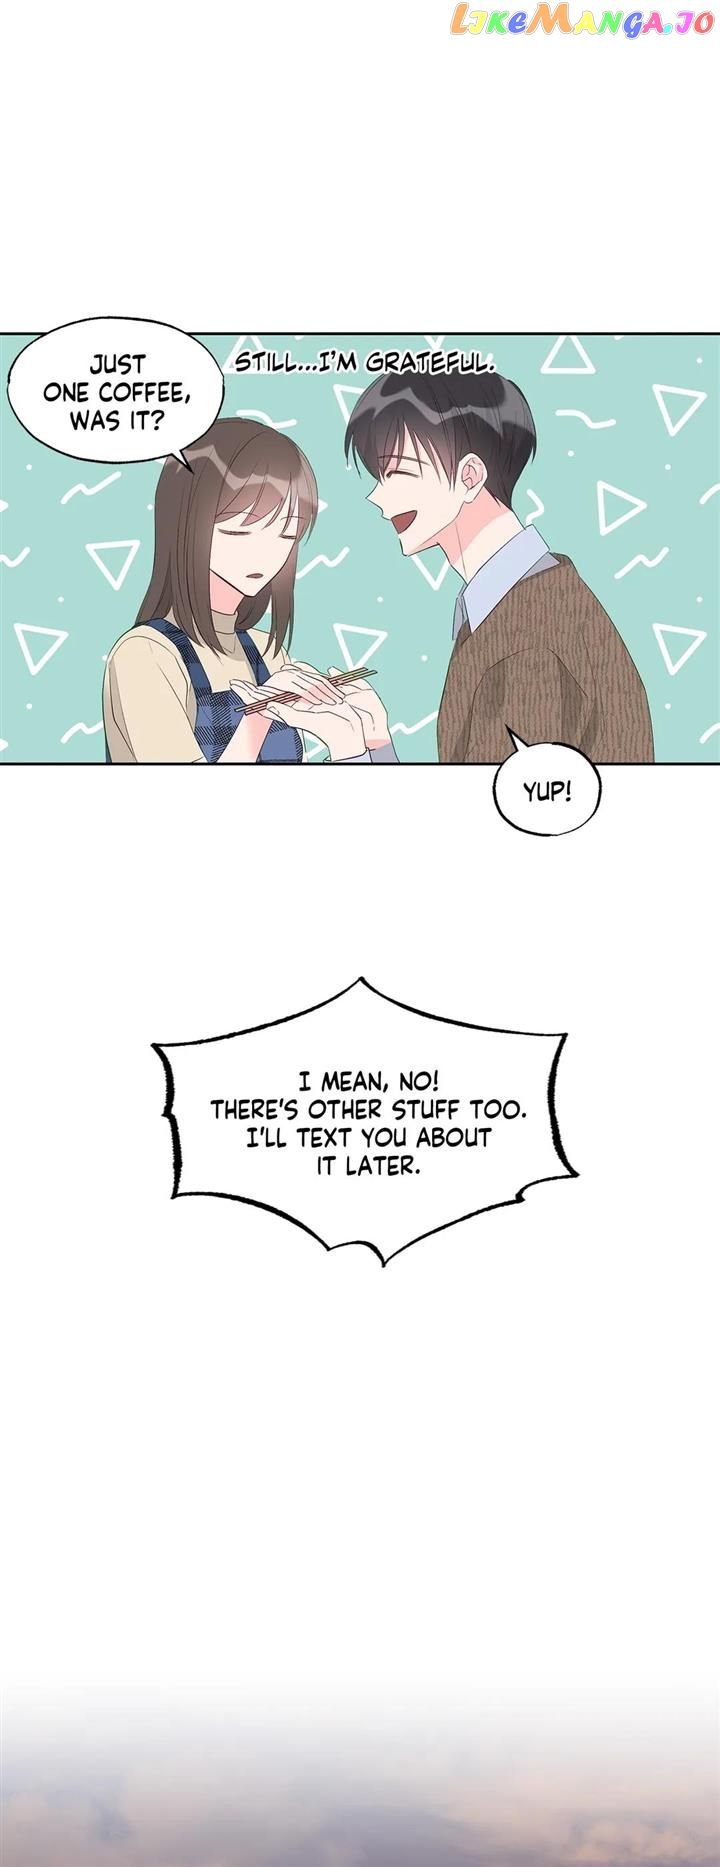 Learning to Love You chapter 48 - Page 10